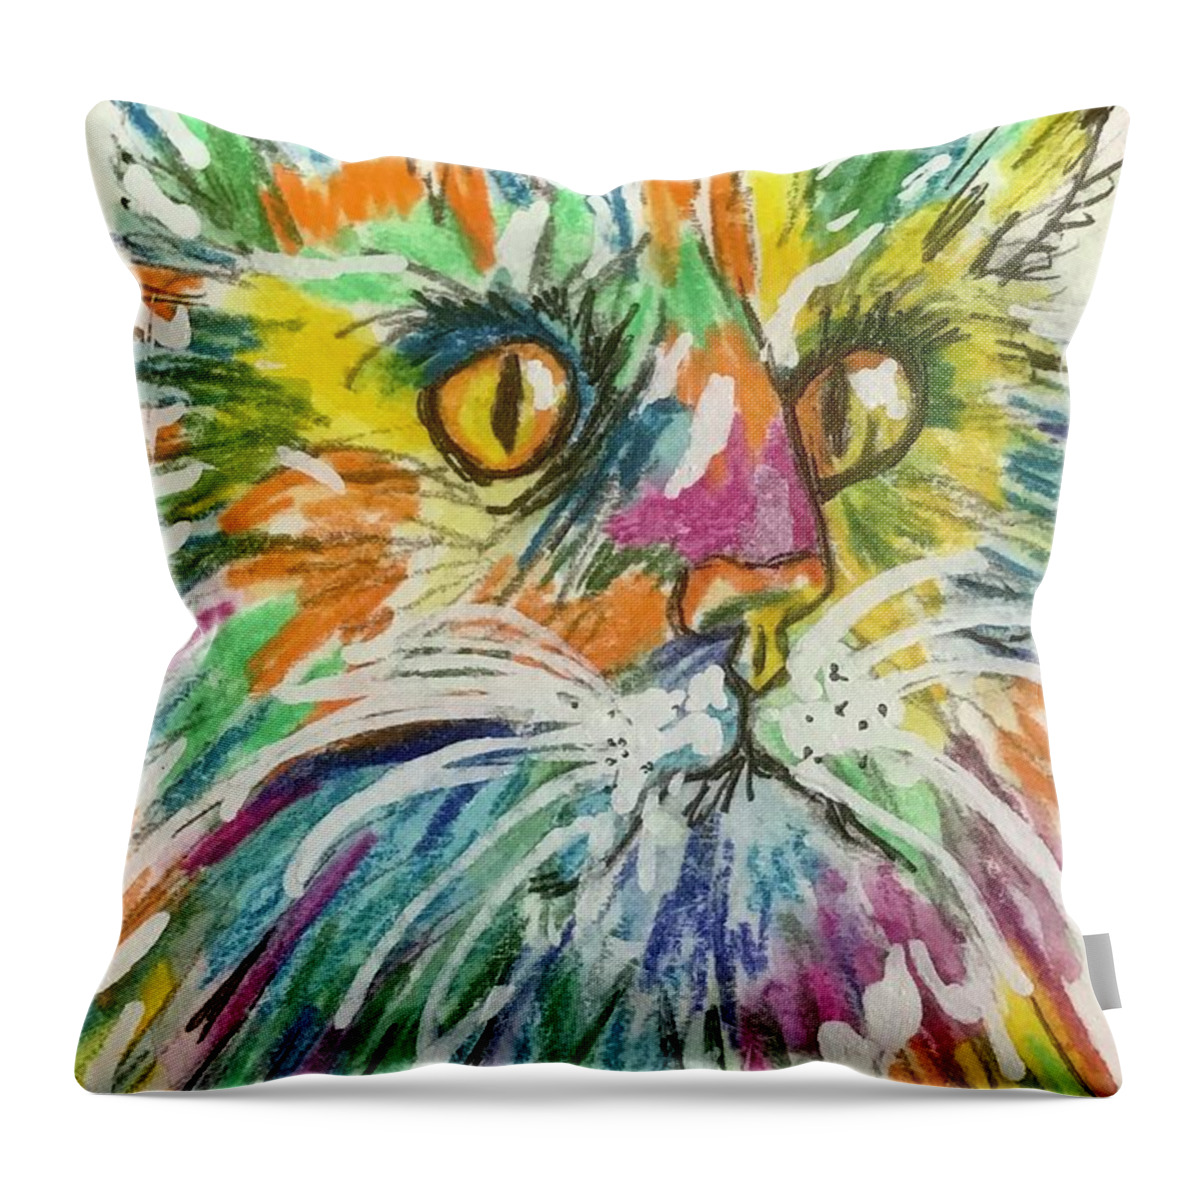 Colorful Cat Throw Pillow featuring the painting Curious Cat by Kathy Marrs Chandler